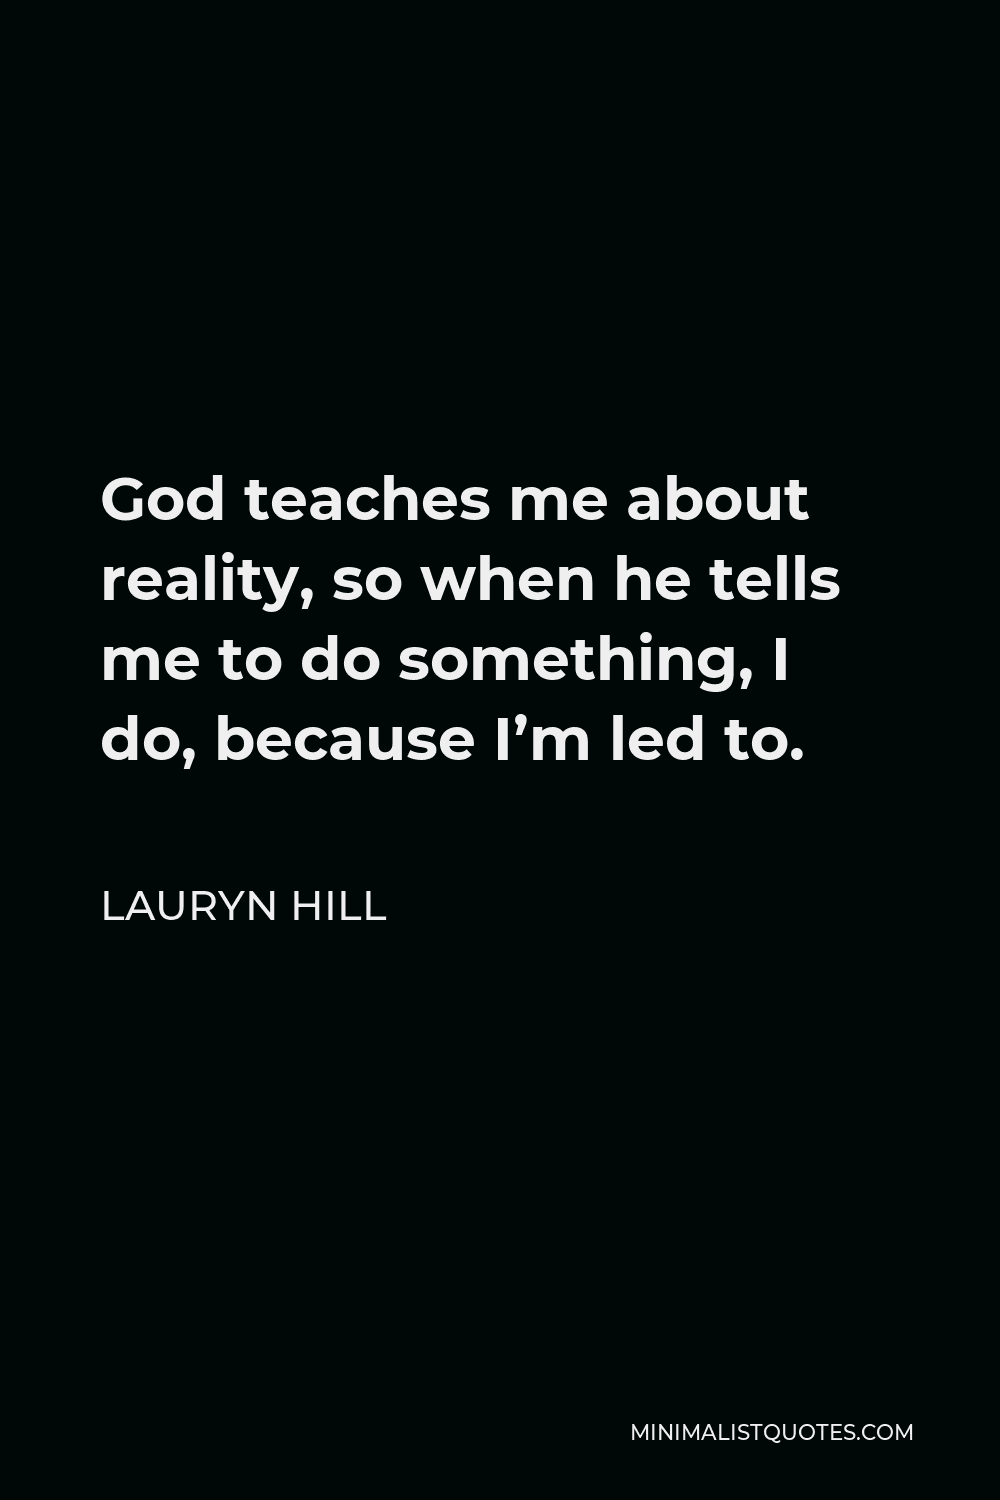 Lauryn Hill Quote God Teaches Me About Reality So When He Tells Me To Do Something I Do Because I M Led To